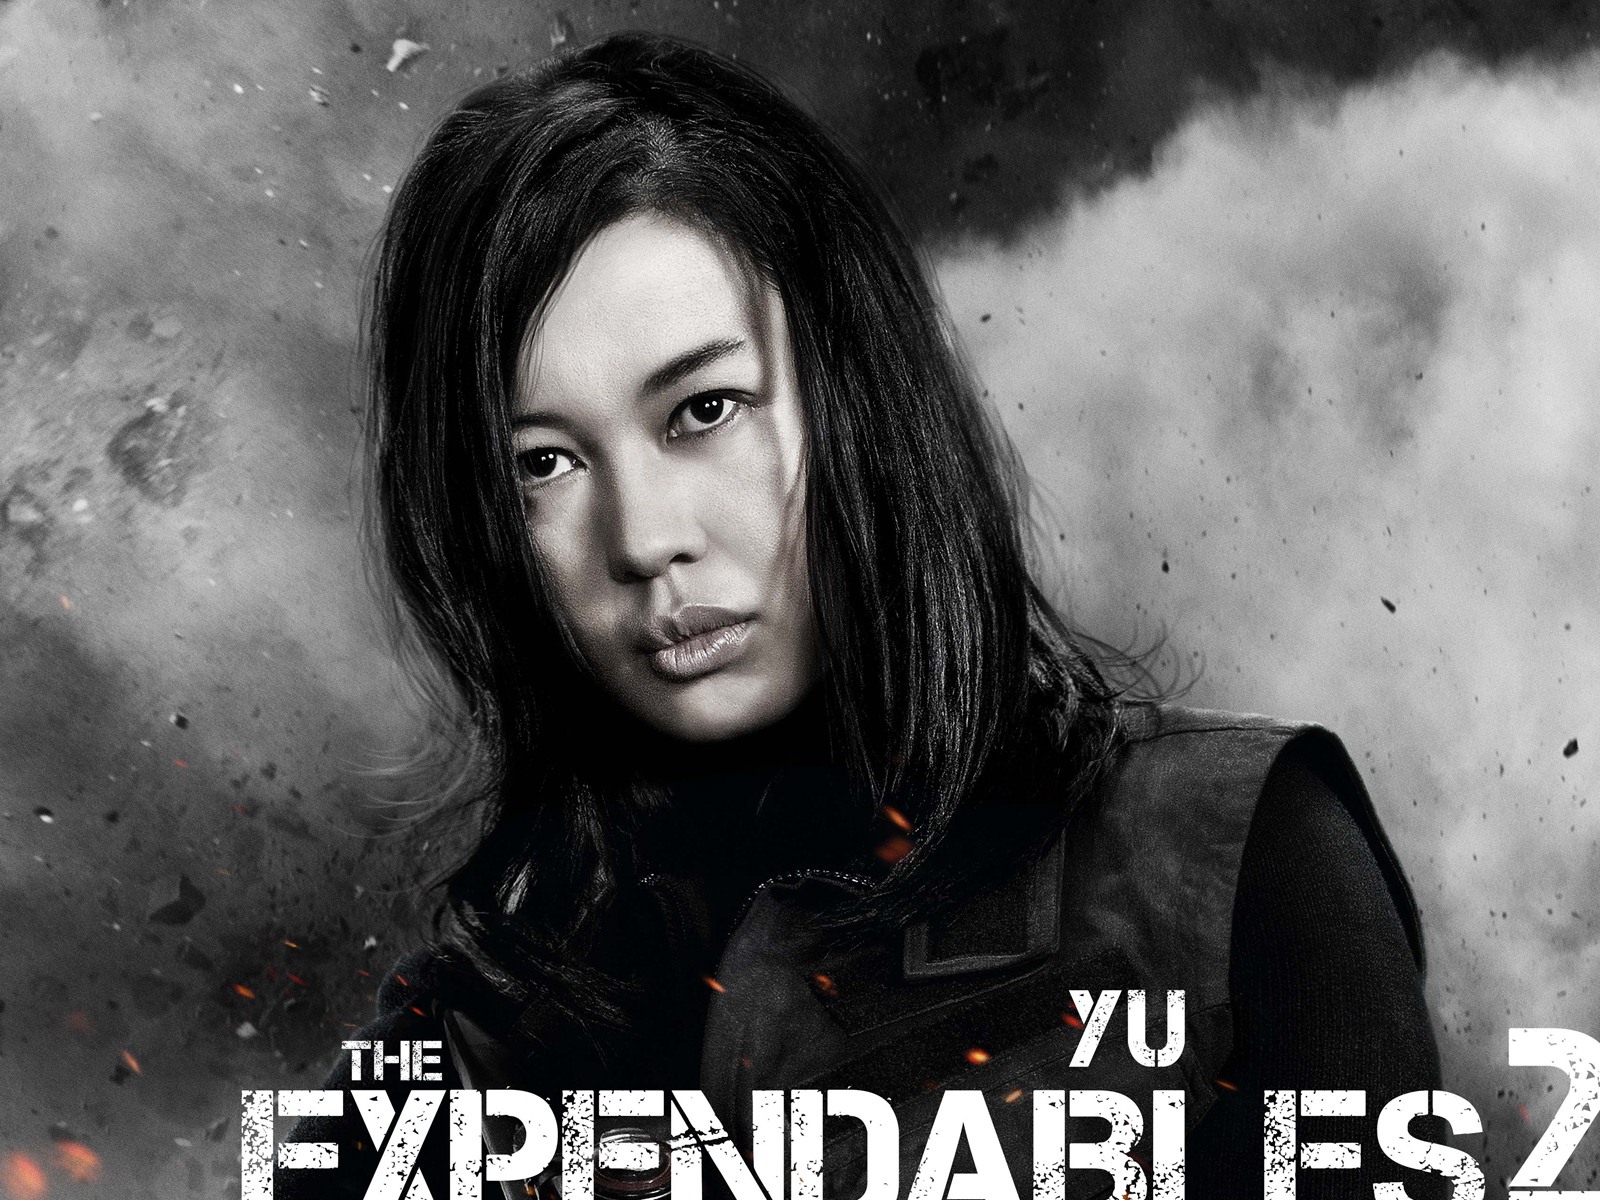 2012 The Expendables 2 敢死队2 高清壁纸11 - 1600x1200